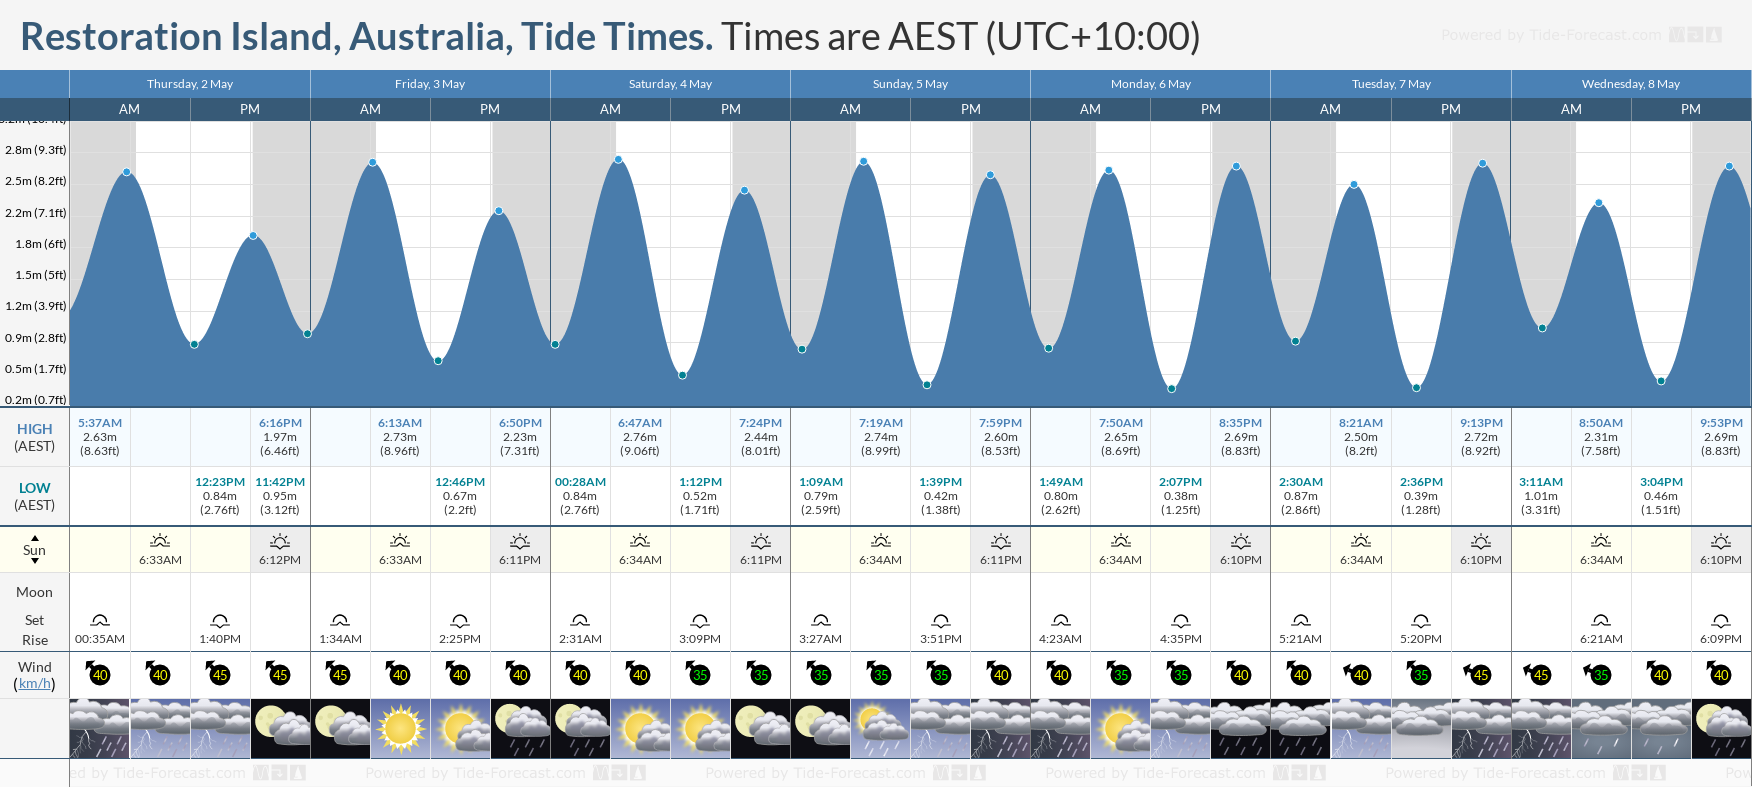 Restoration Island, Australia Tide Chart including high and low tide tide times for the next 7 days